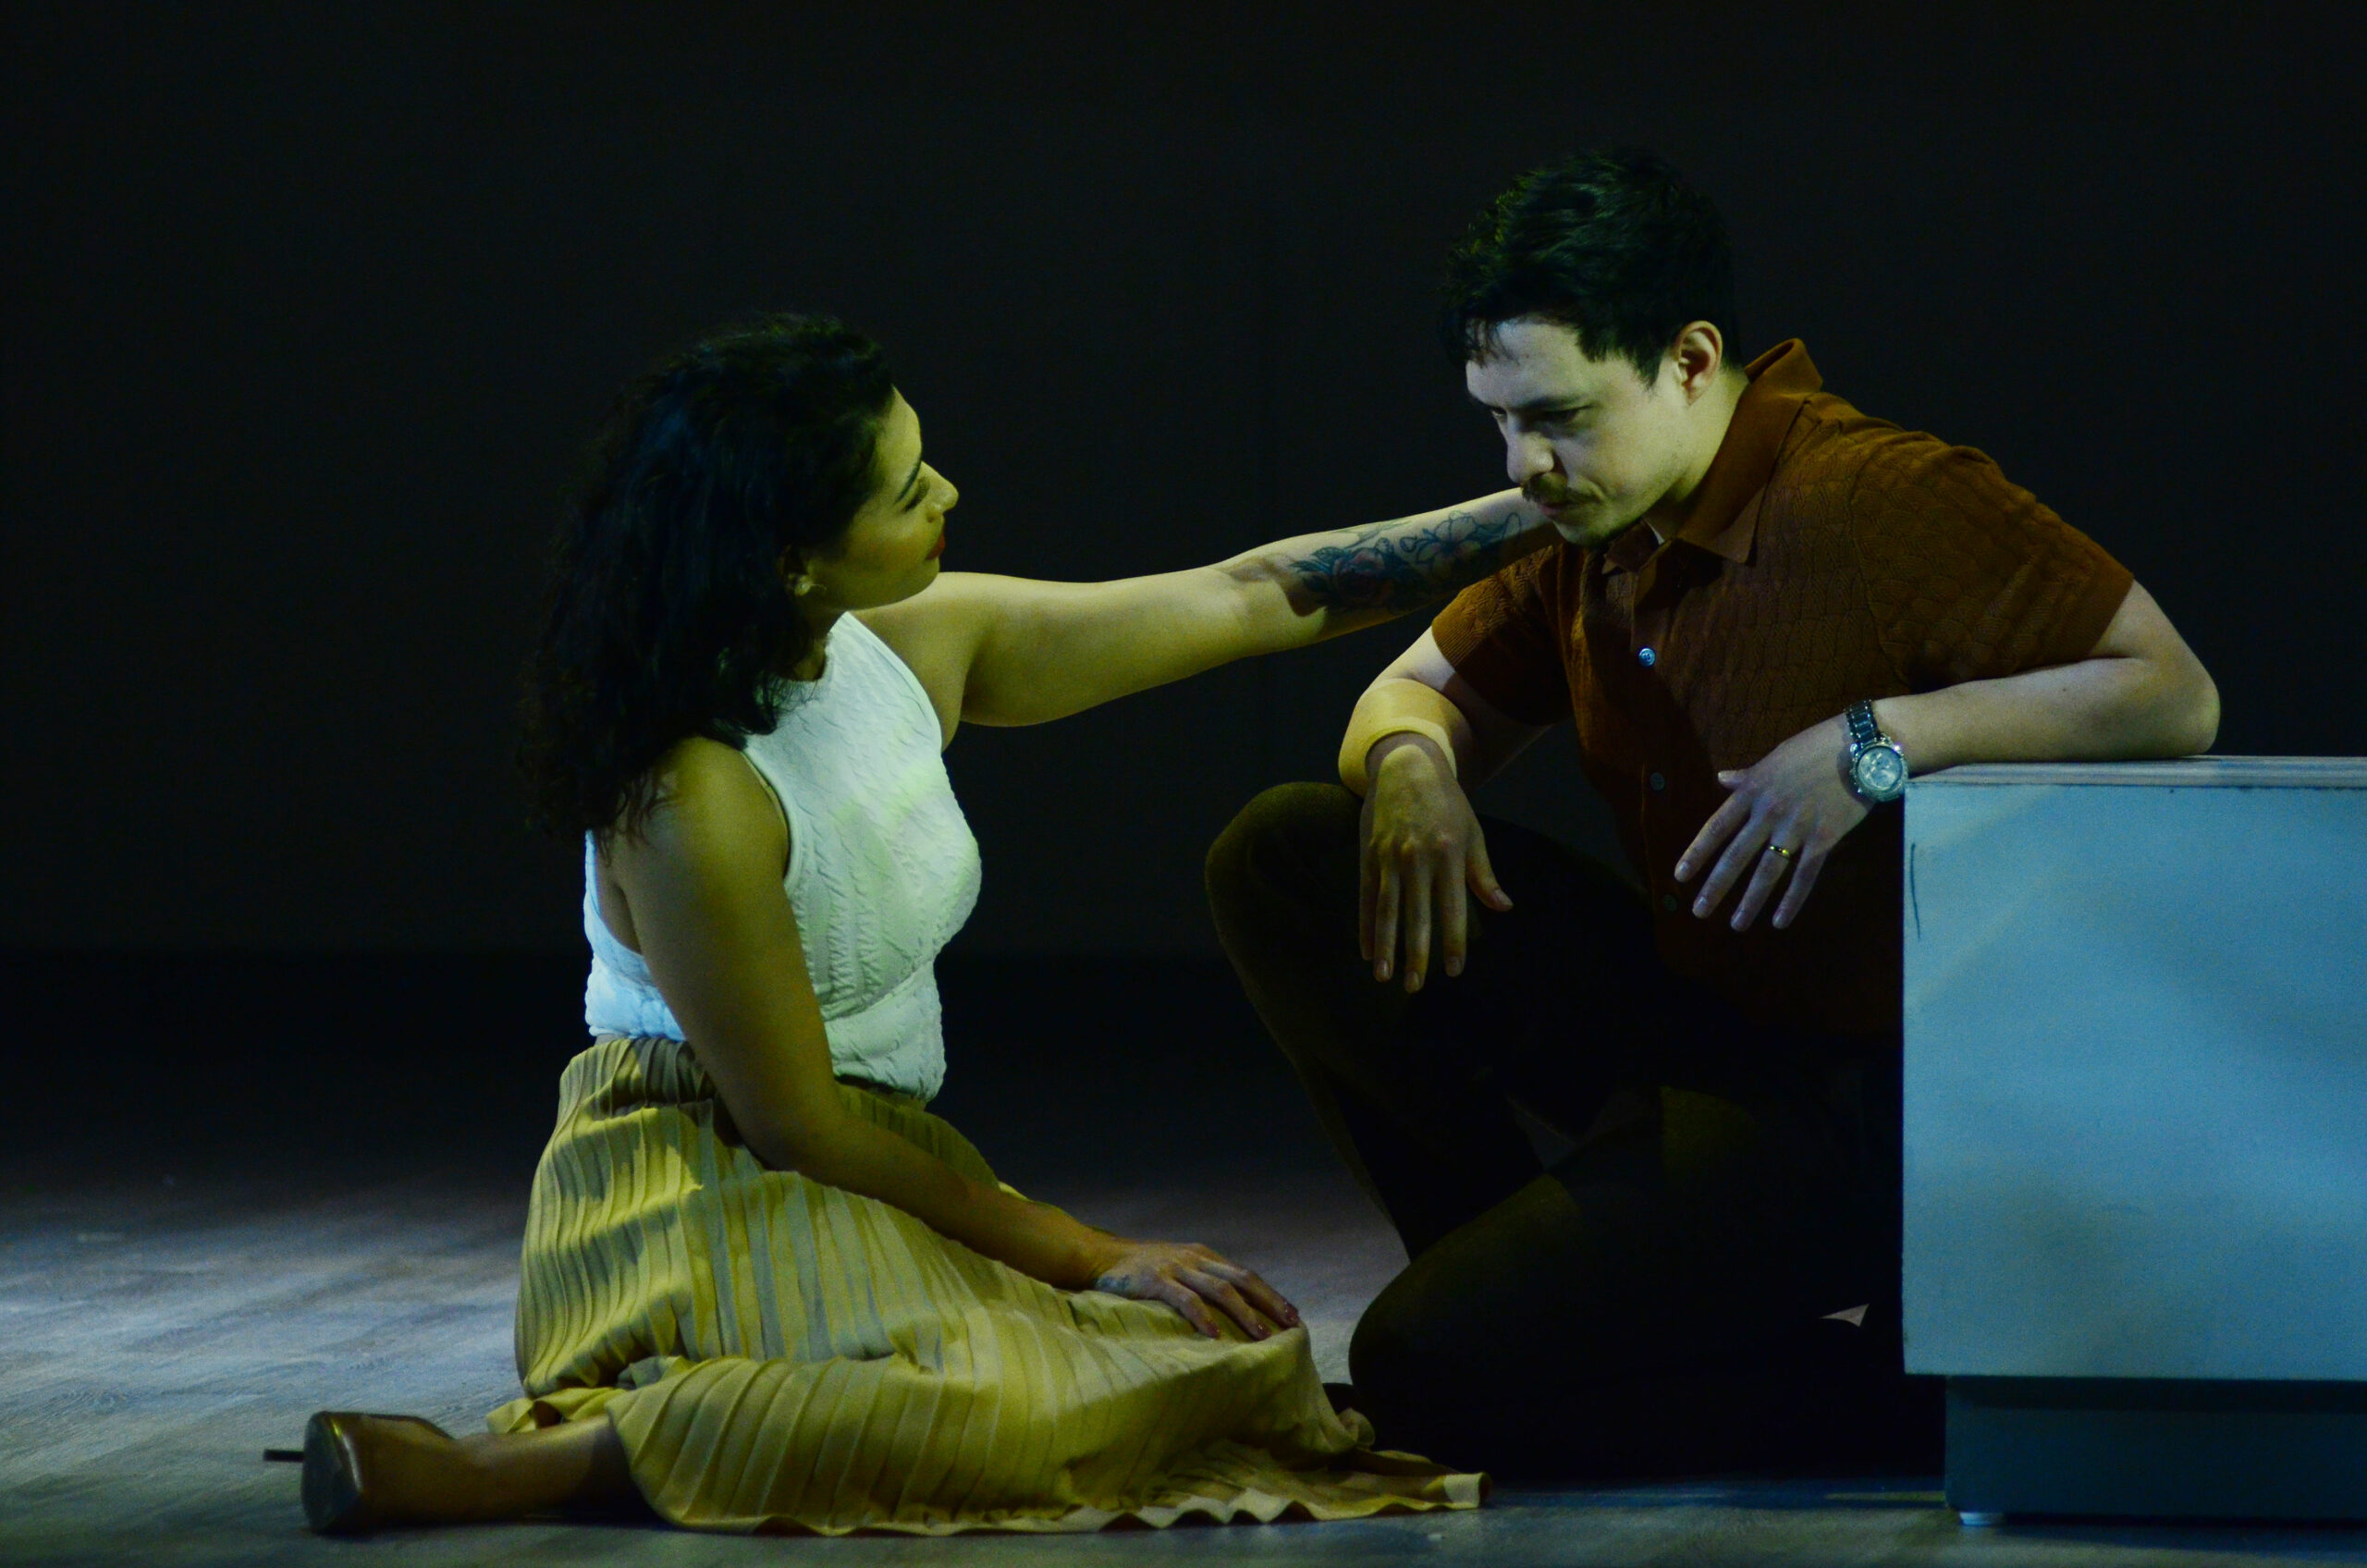 Repertory’s ‘Betrayal’ is not your typical extramarital affair drama